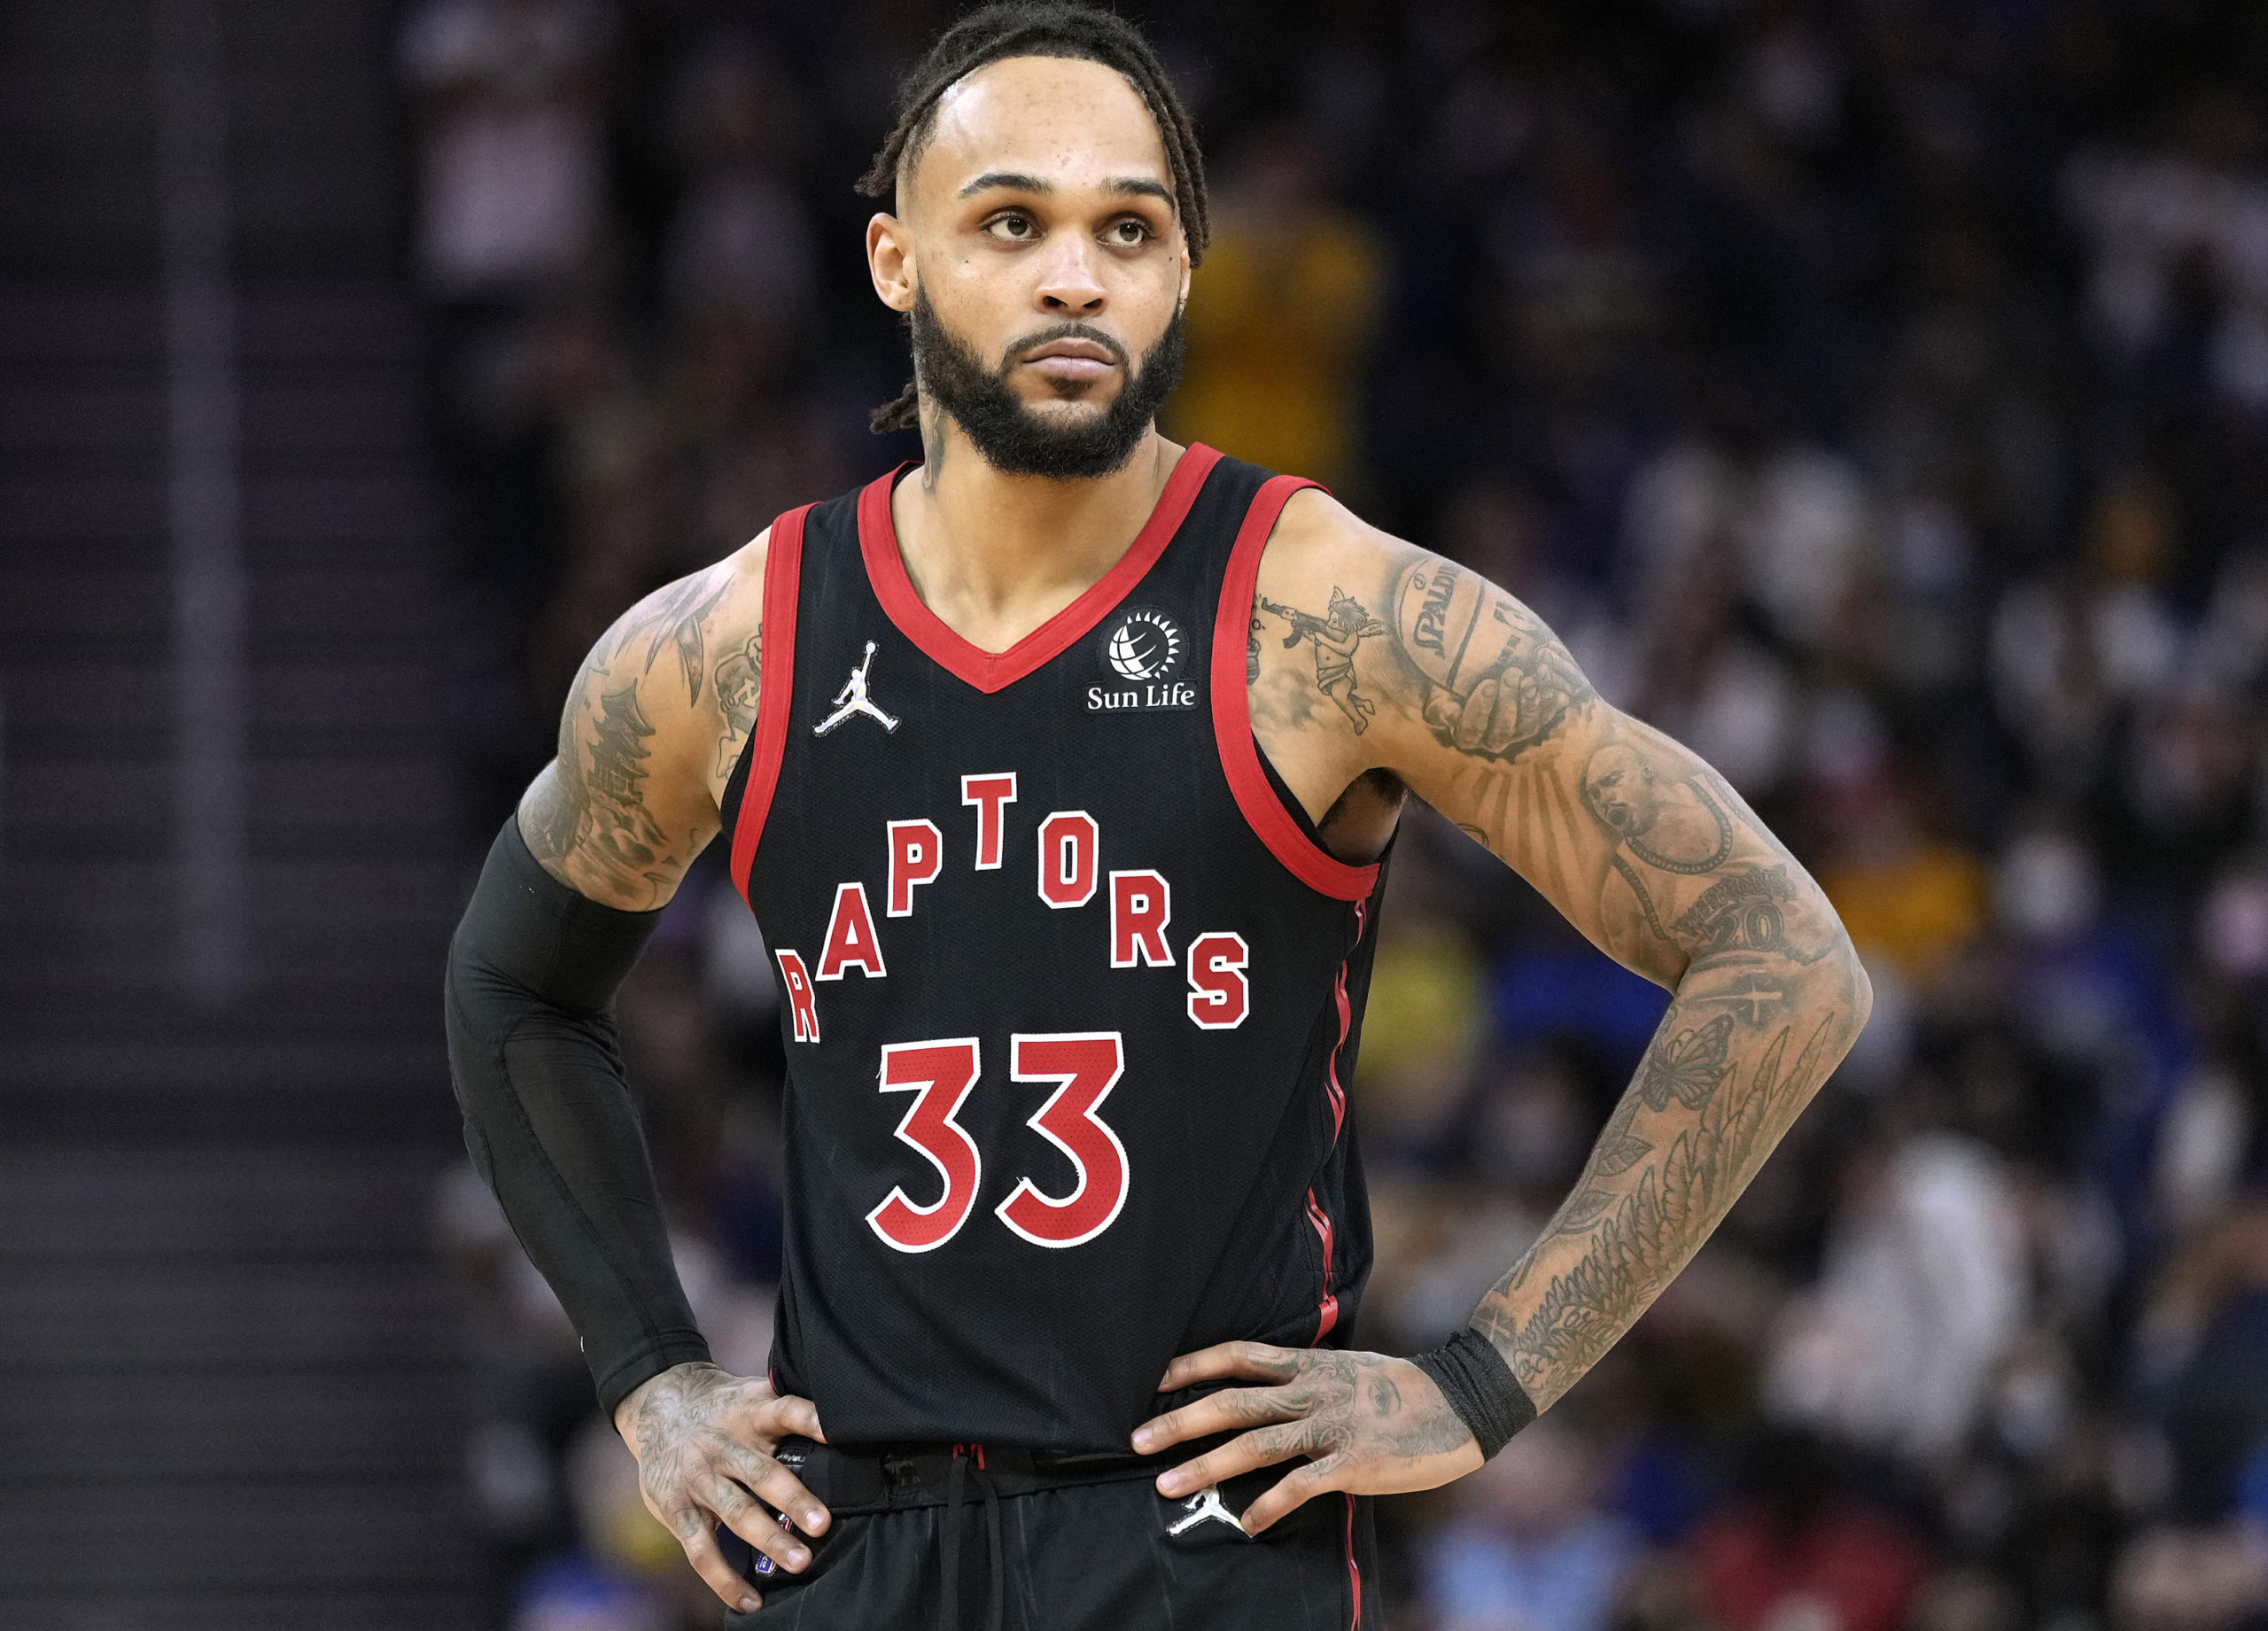 NBA Trade Rumors: Will Gary Trent Jr. be traded from the Toronto Raptors? Who are the Frontrunners linked to acquire the Guard?